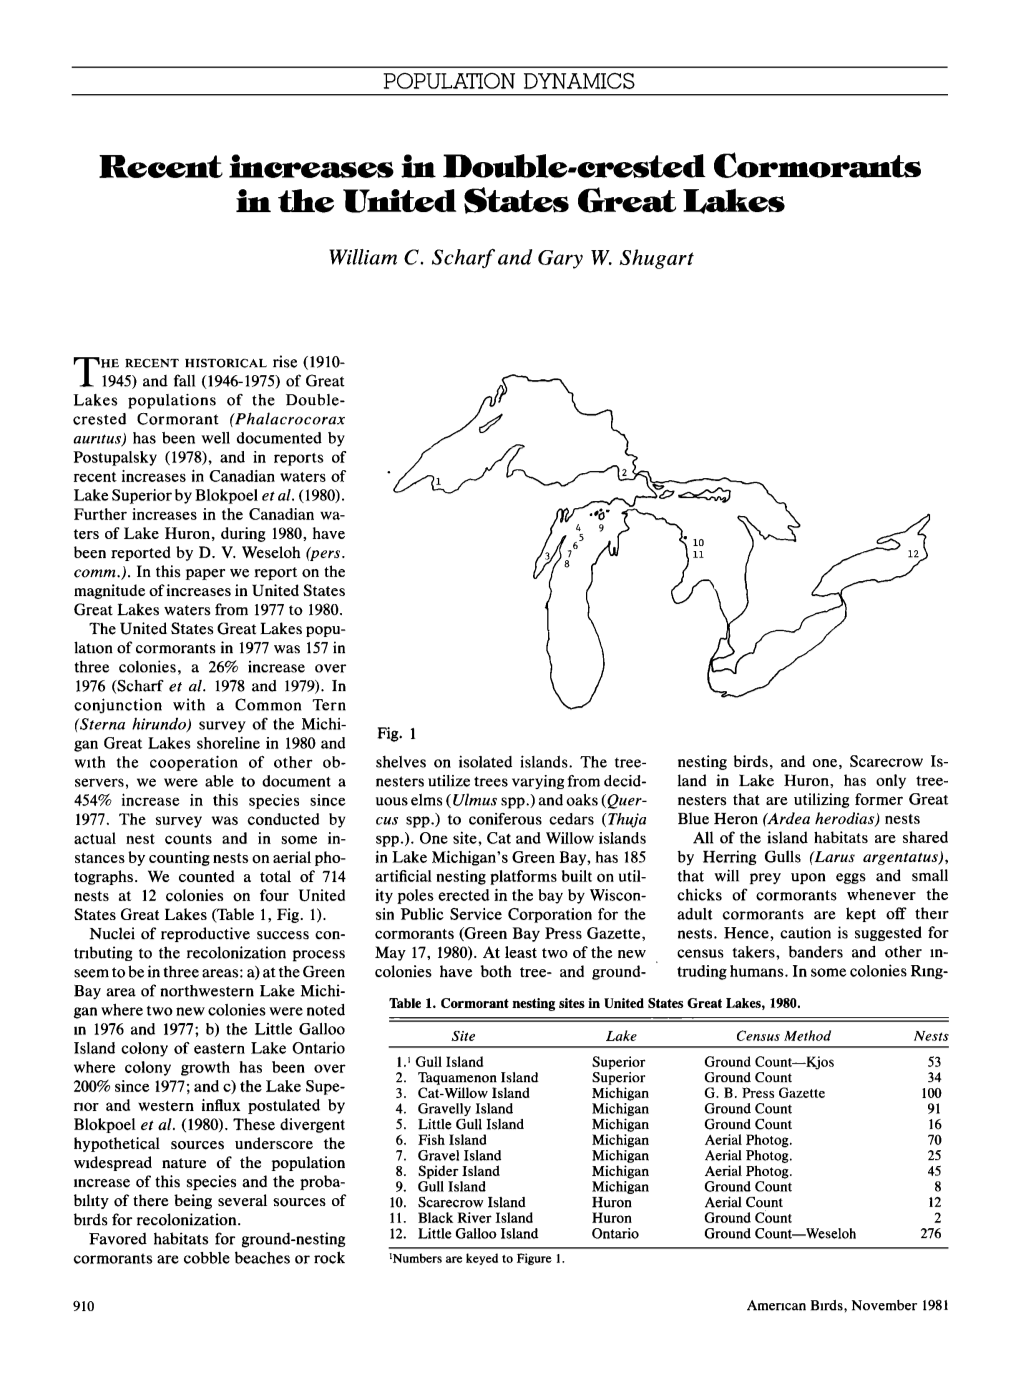 Recent Increases in Double-Crested Cormorants in the United States Great Lakes